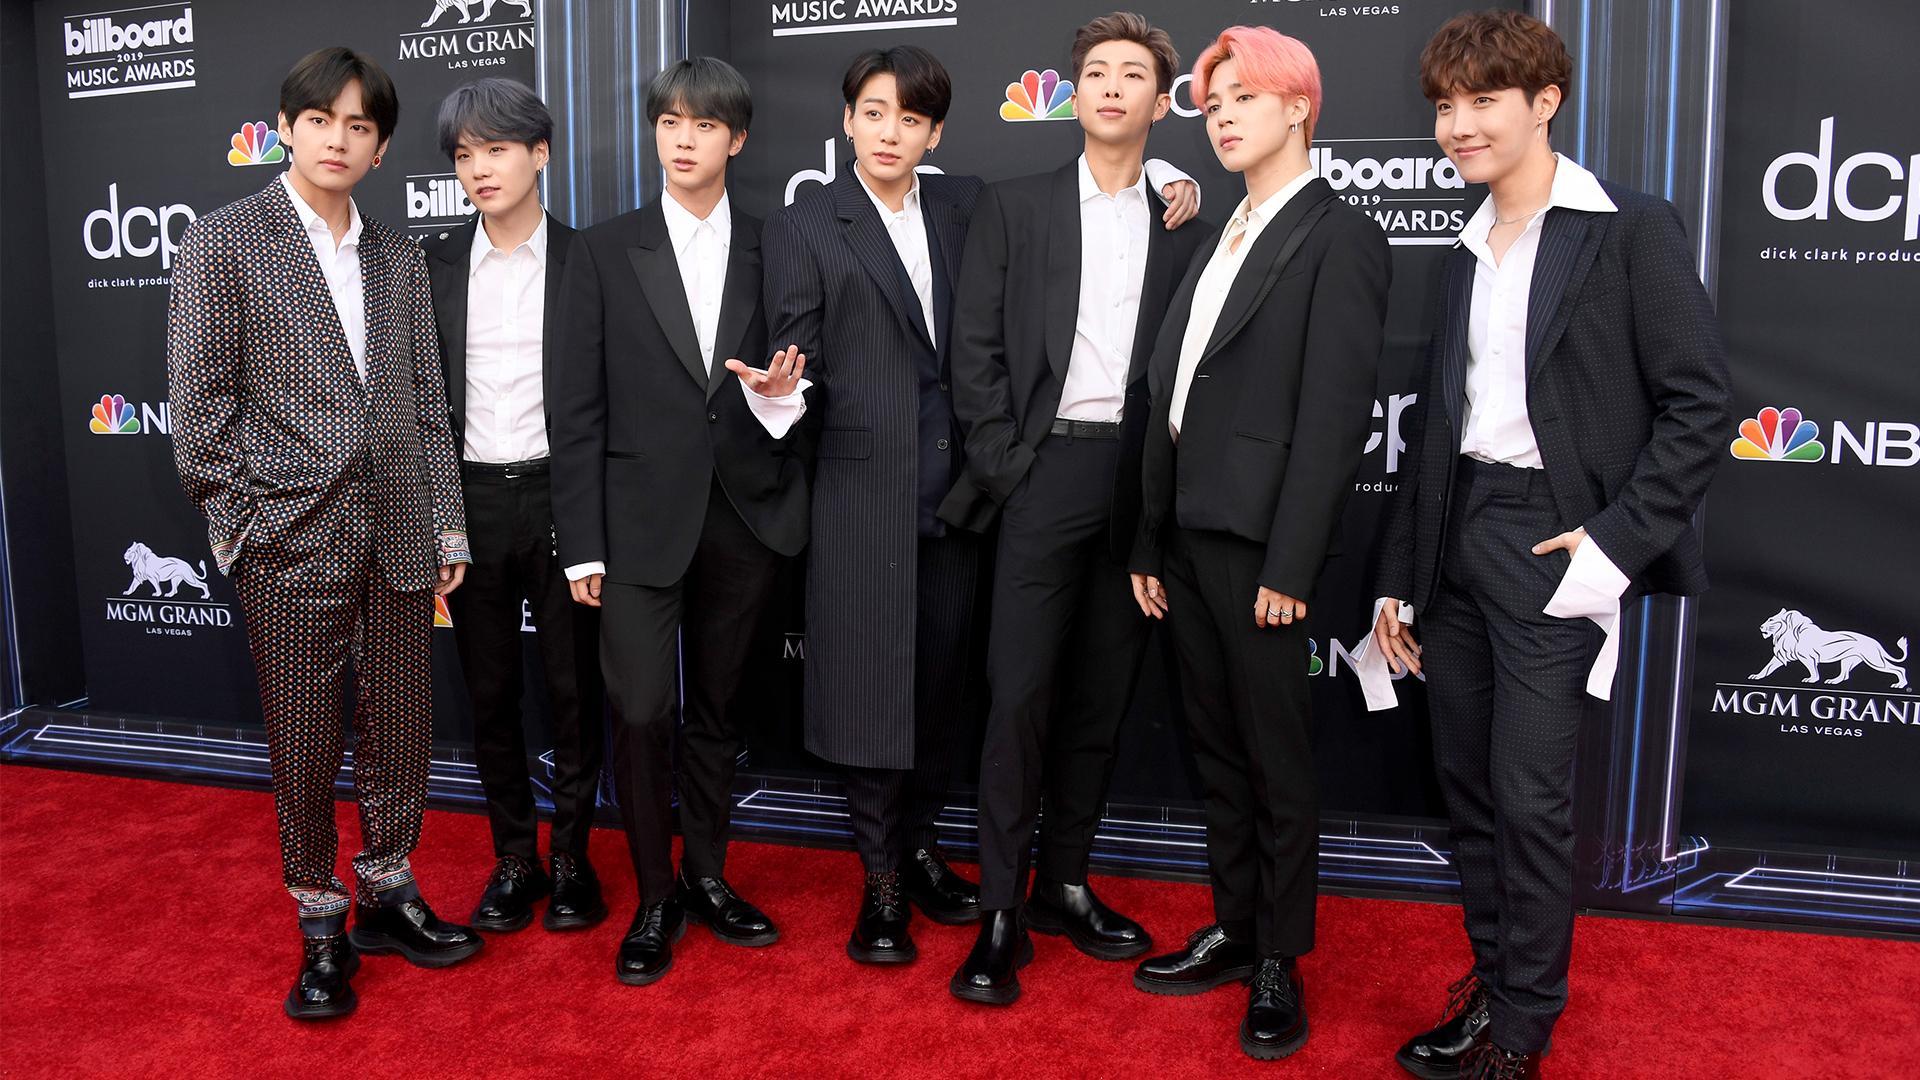 BTS Takes The Stage With Halsey For High Energy 'Boy With Luv